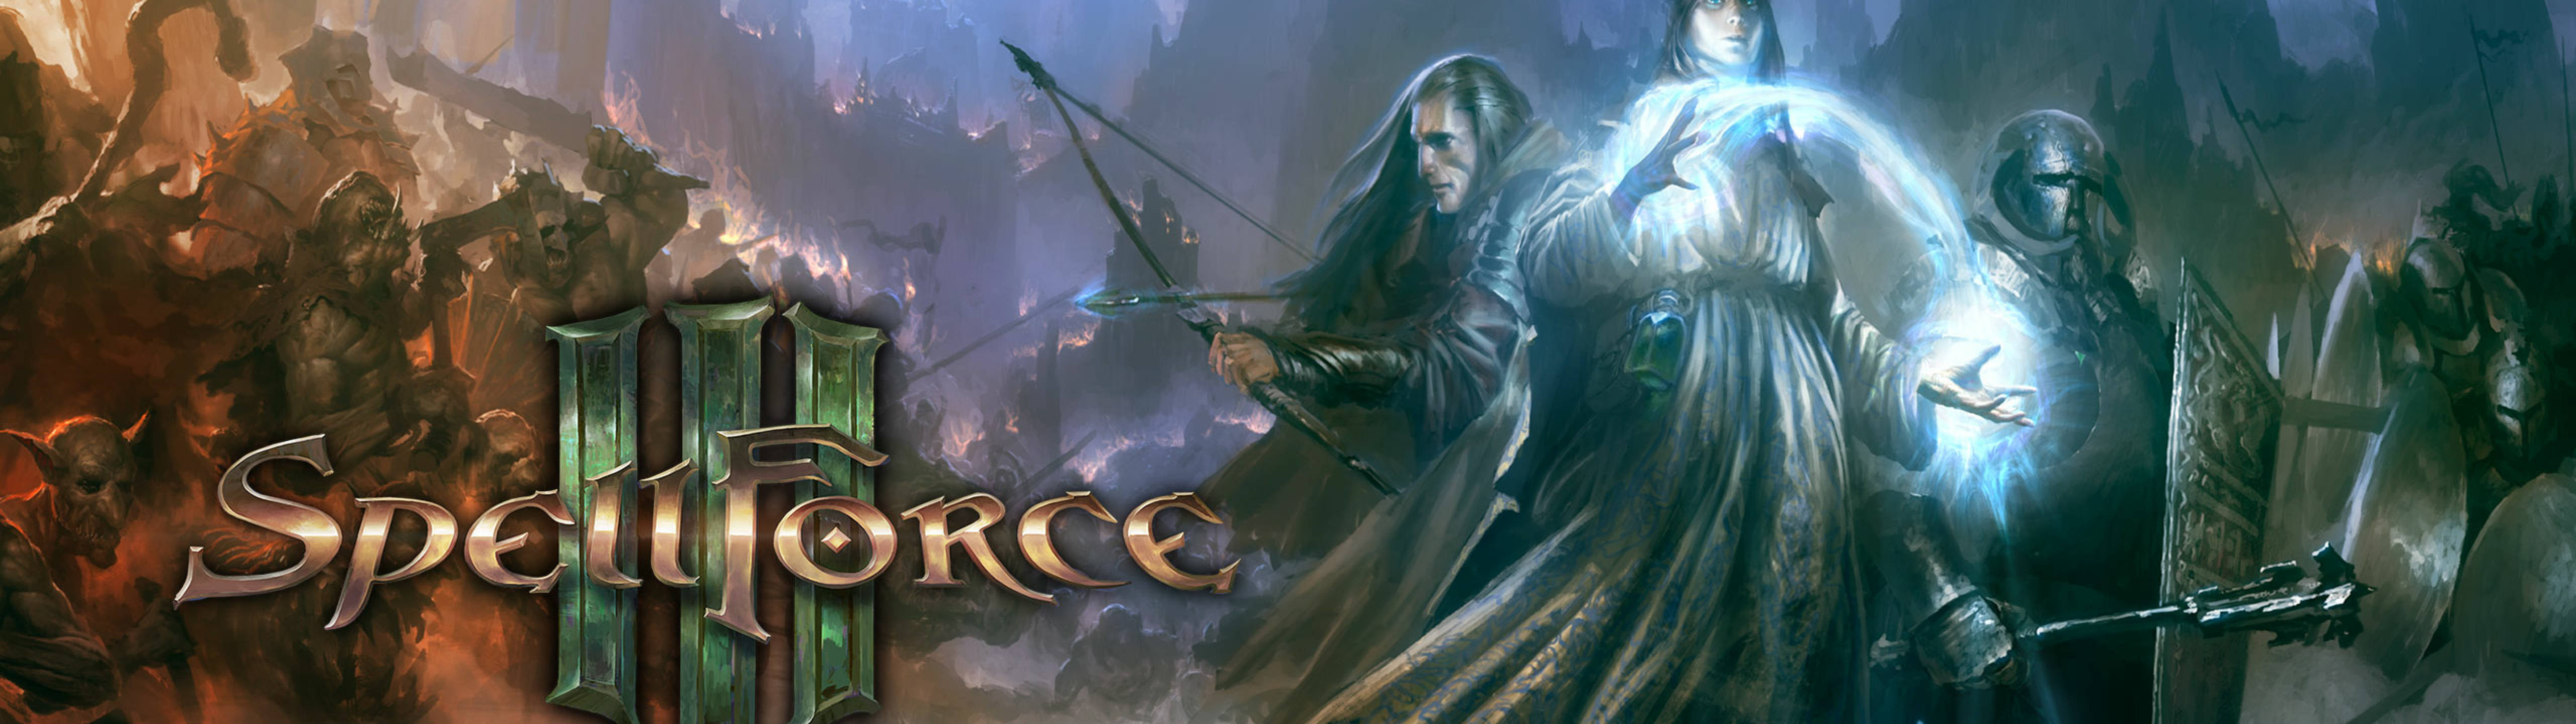 5120x1440 Game Spellforce 3